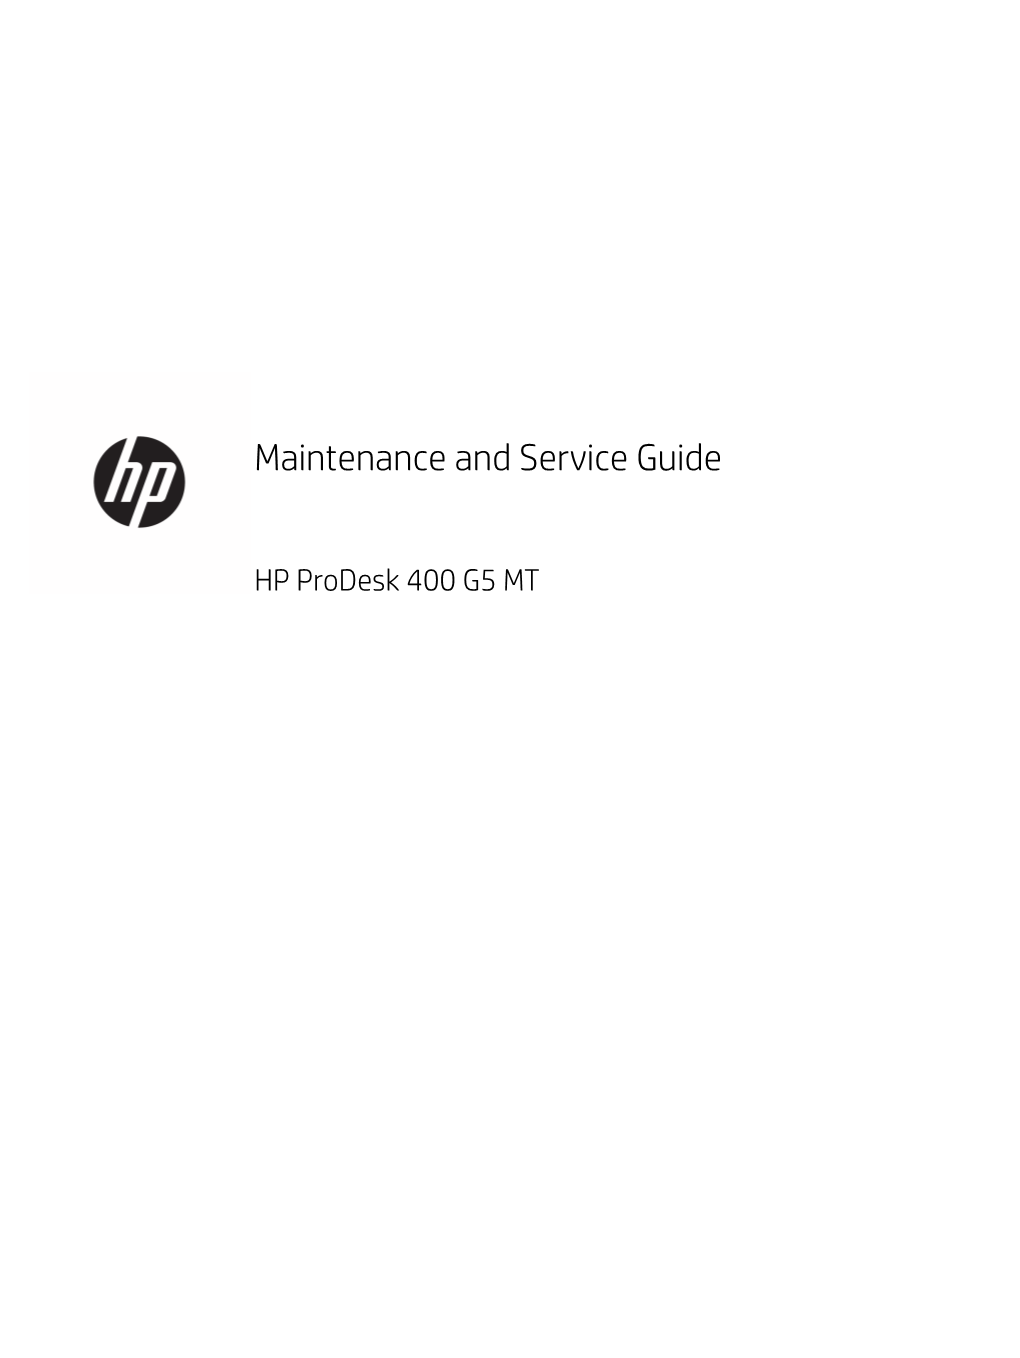 Maintenance and Service Guide HP Prodesk 400 G5 MT